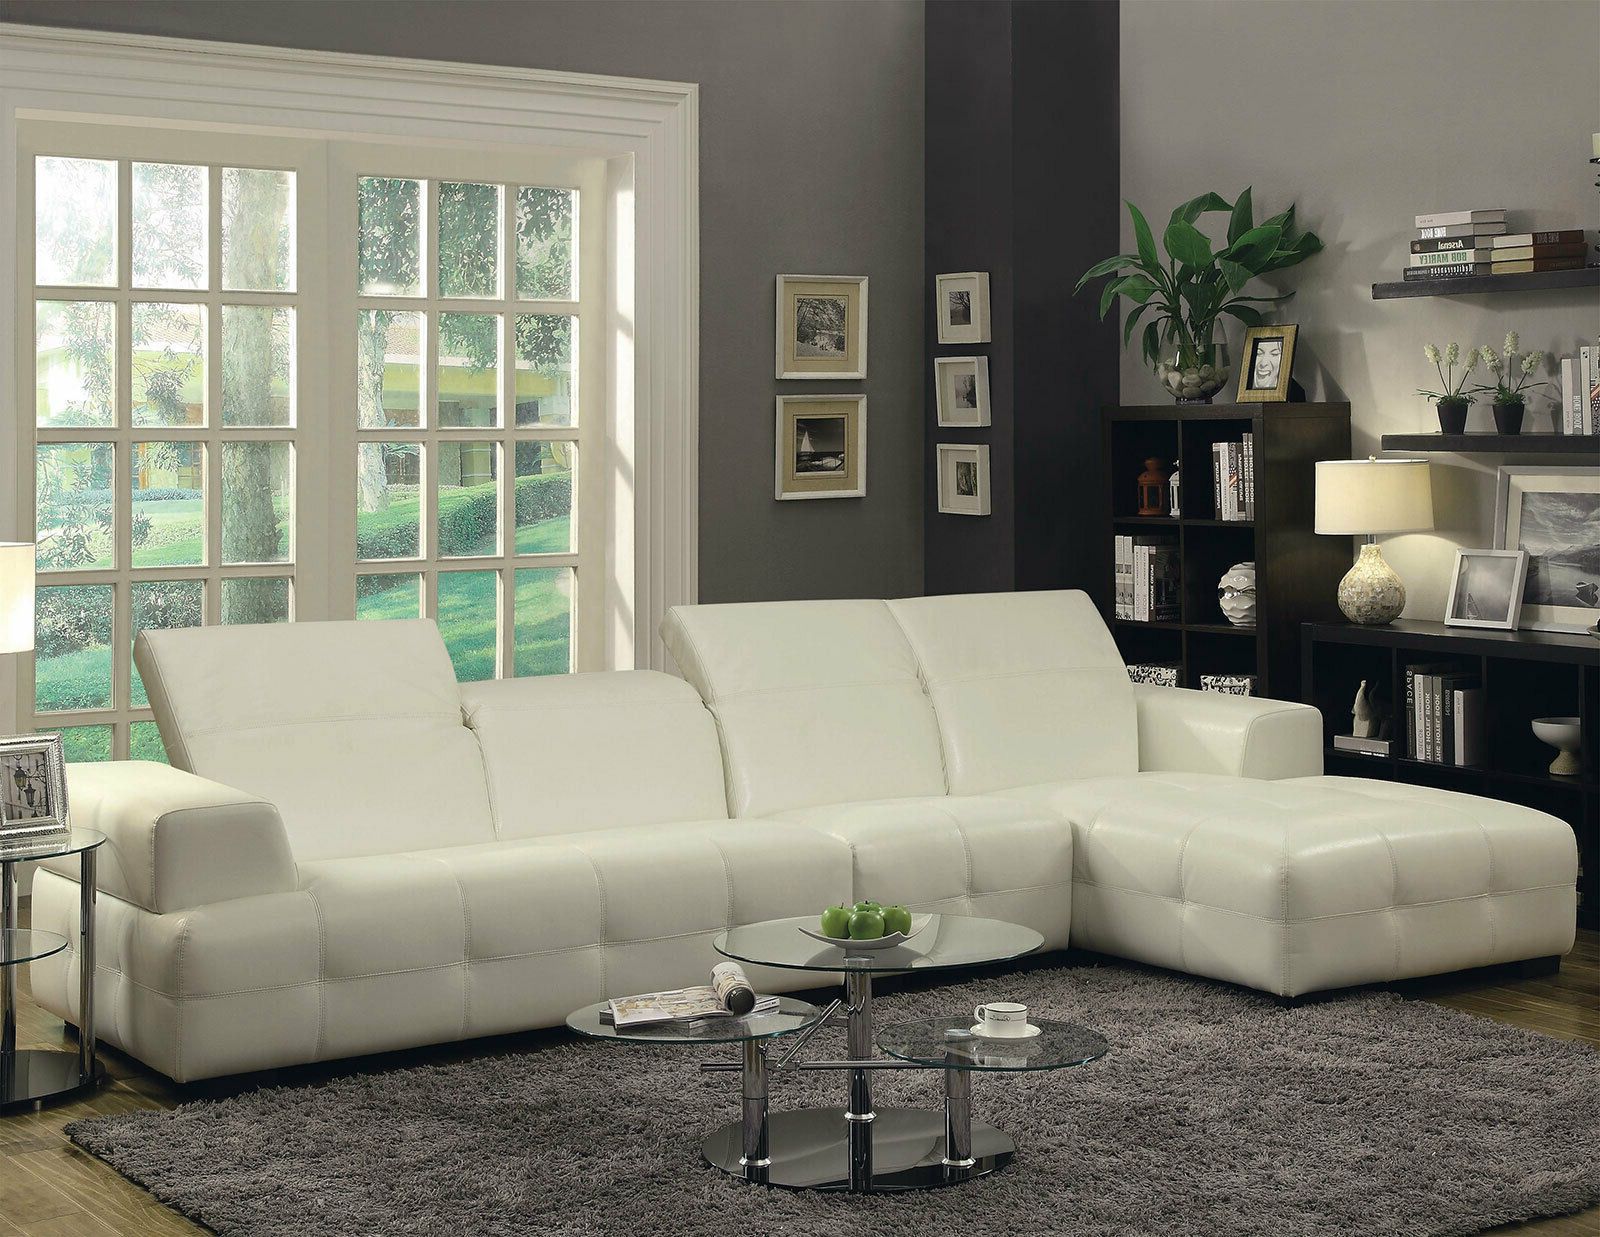 Amara Contemporary Sectional Living Room Furniture White Faux Leather Pertaining To Faux Leather Sectional Sofa Sets (View 16 of 20)